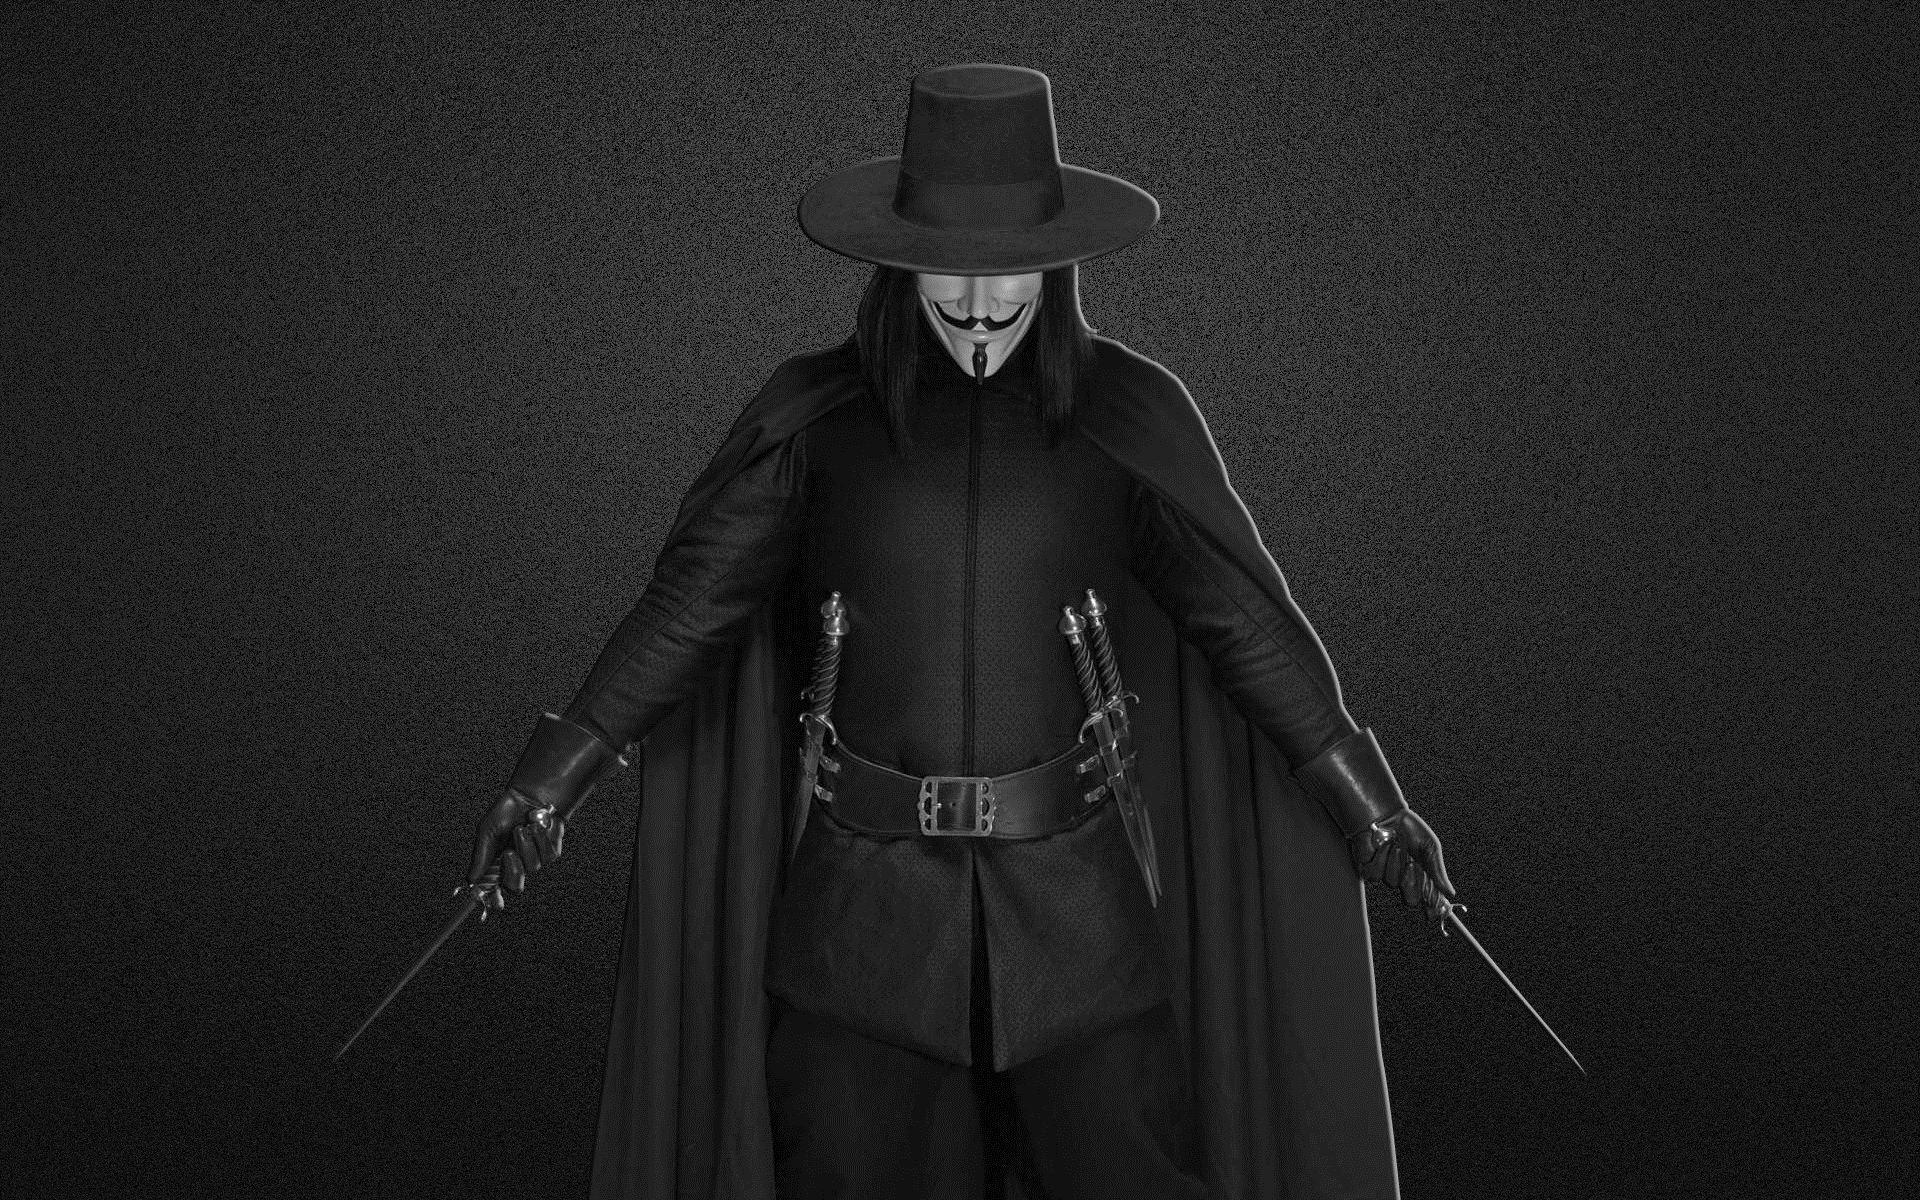 v for vendetta movie Image. Movies that Move me